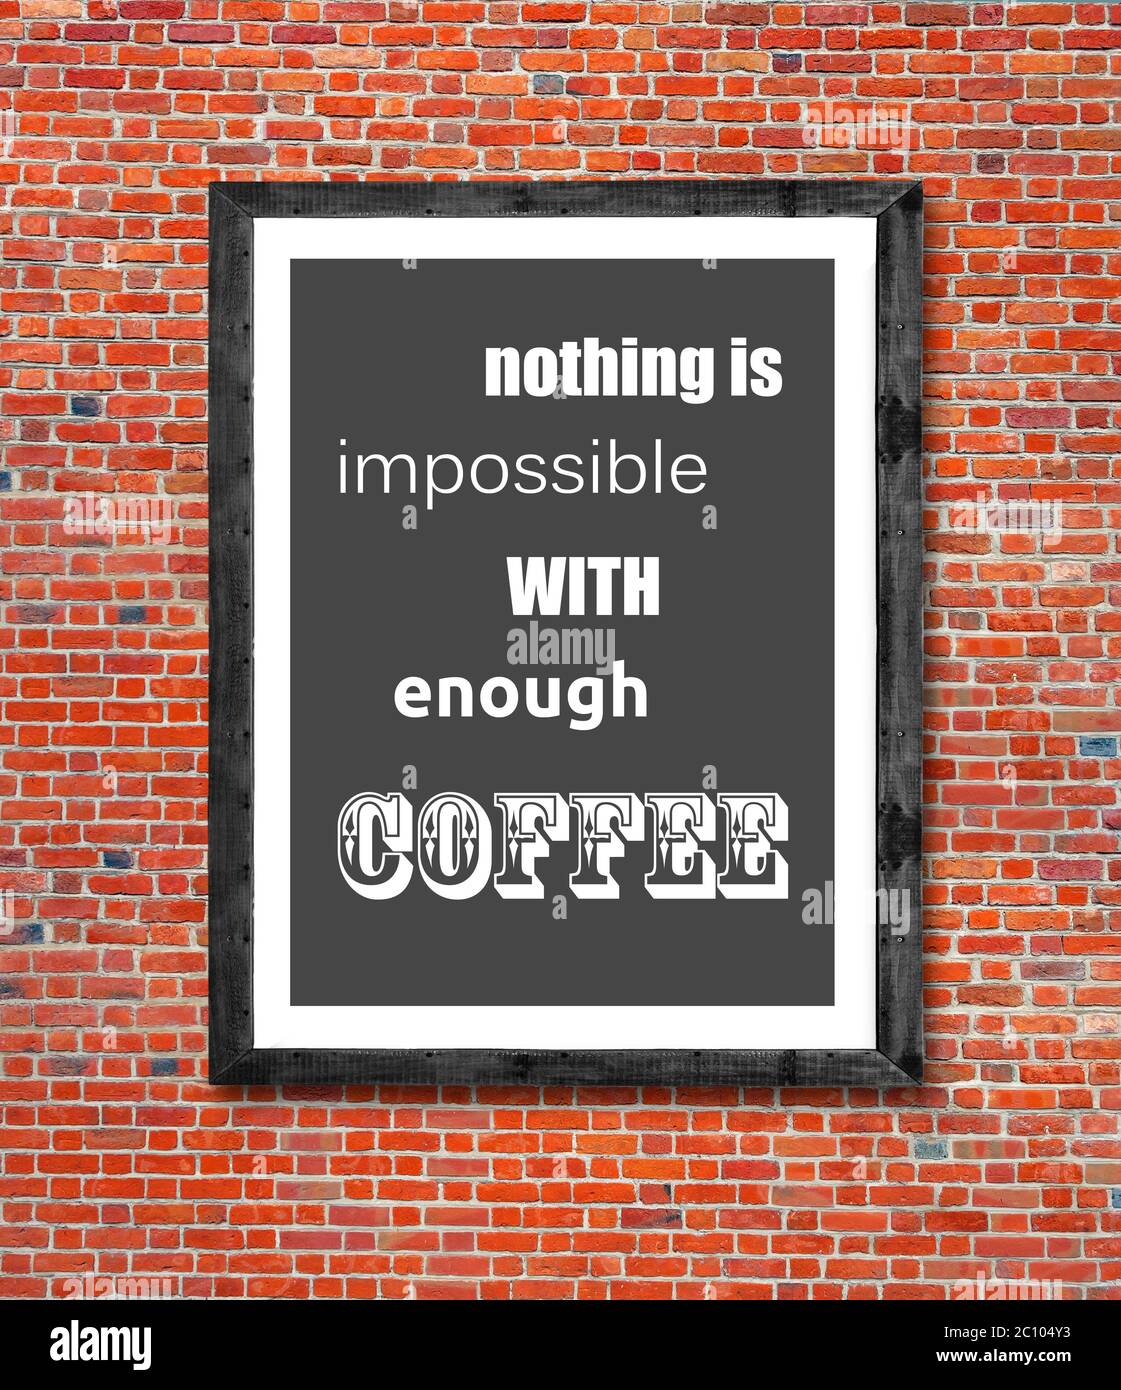 Nothing is impossible with enough coffee written in picture frame Stock Photo